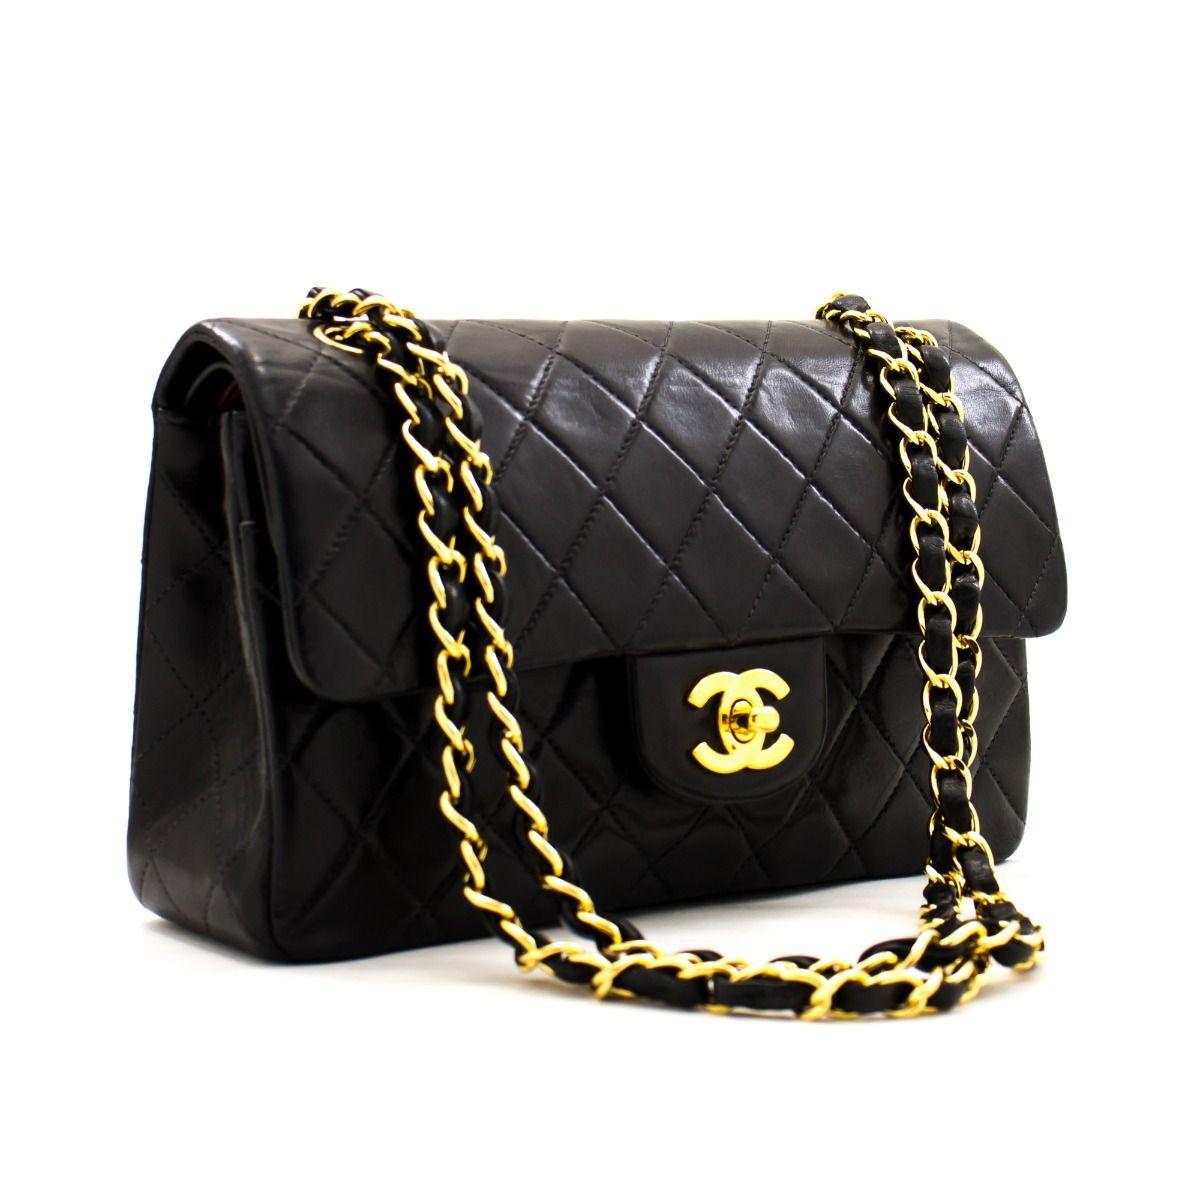 This iconic Chanel 9'' bag is crafted from quilted black lambskin and features a double flap. On the front flap there is the classic CC logo twist lock, and on the second flap a stud closure with one slip-in pocket. The inside lining is covered in